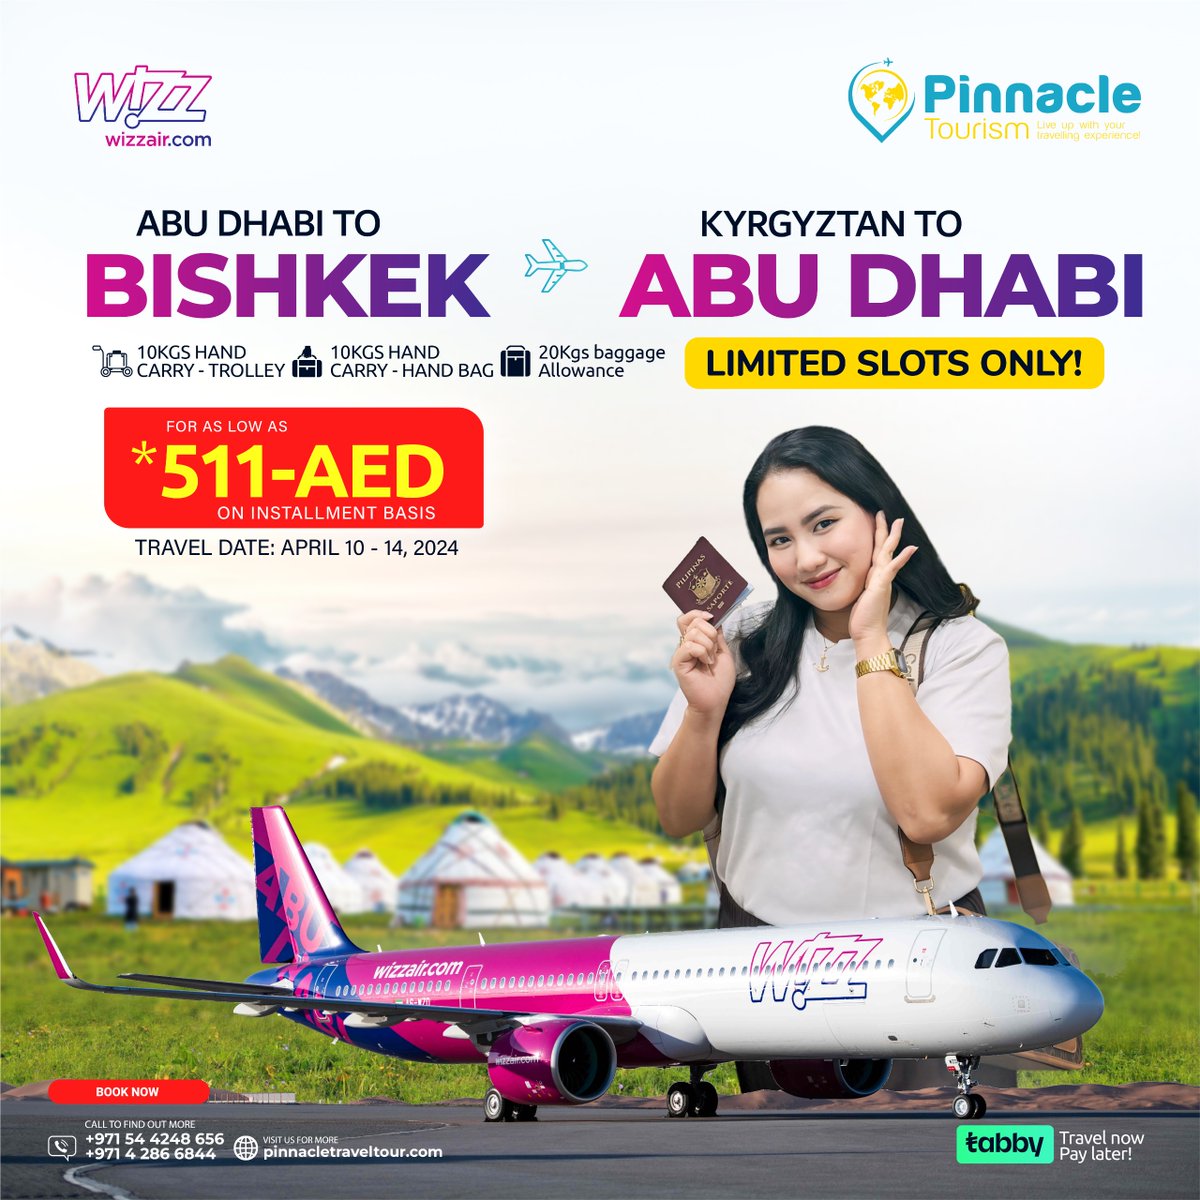 ✈️ Explore the breathtaking landscapes of Kyrgyzstan! 🏔️ Book your round-trip air ticket from Abu Dhabi to Kyrgyzstan with Pinnacle Tourism.

☎️042866844
📲0544248656
📧inquiries@pinnacletraveltour.com

#TravelDeal #AbuDhabiToKyrgyzstan #AffordableTravel #ExploreKyrgyzstan